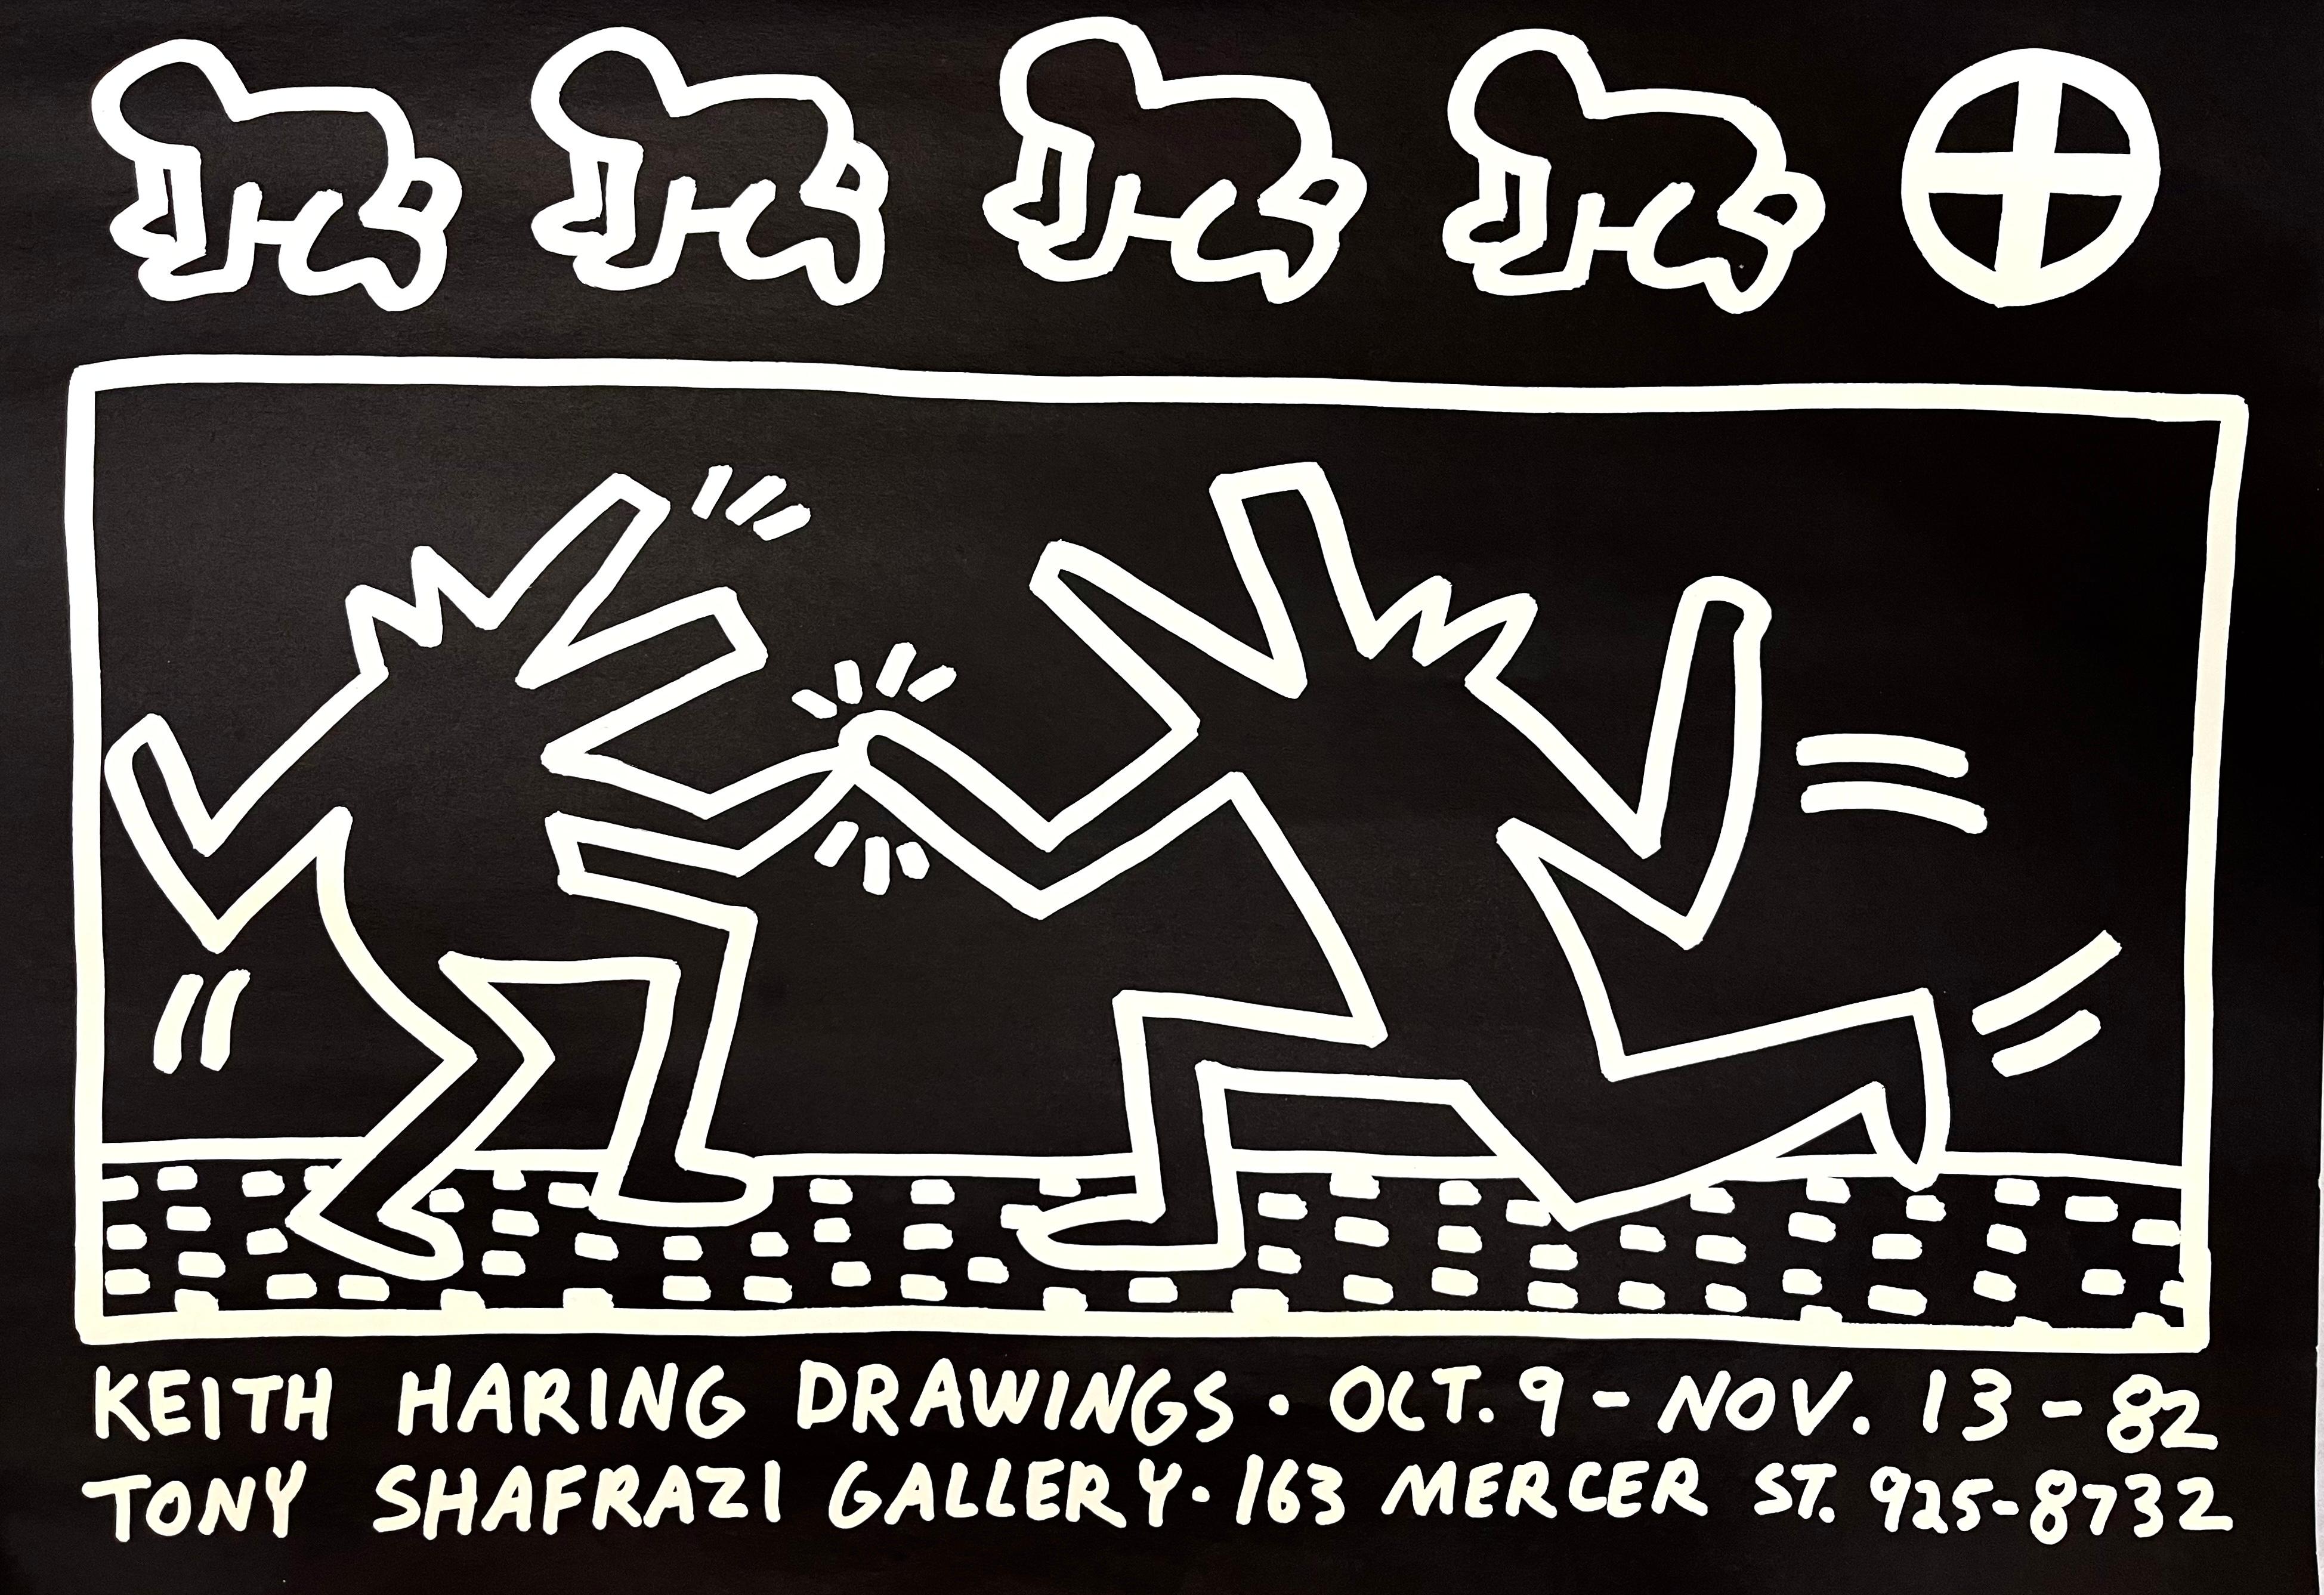 Keith Haring Drawings poster 1982 (Keith Haring Tony Shafrazi gallery 1982)  For Sale 4